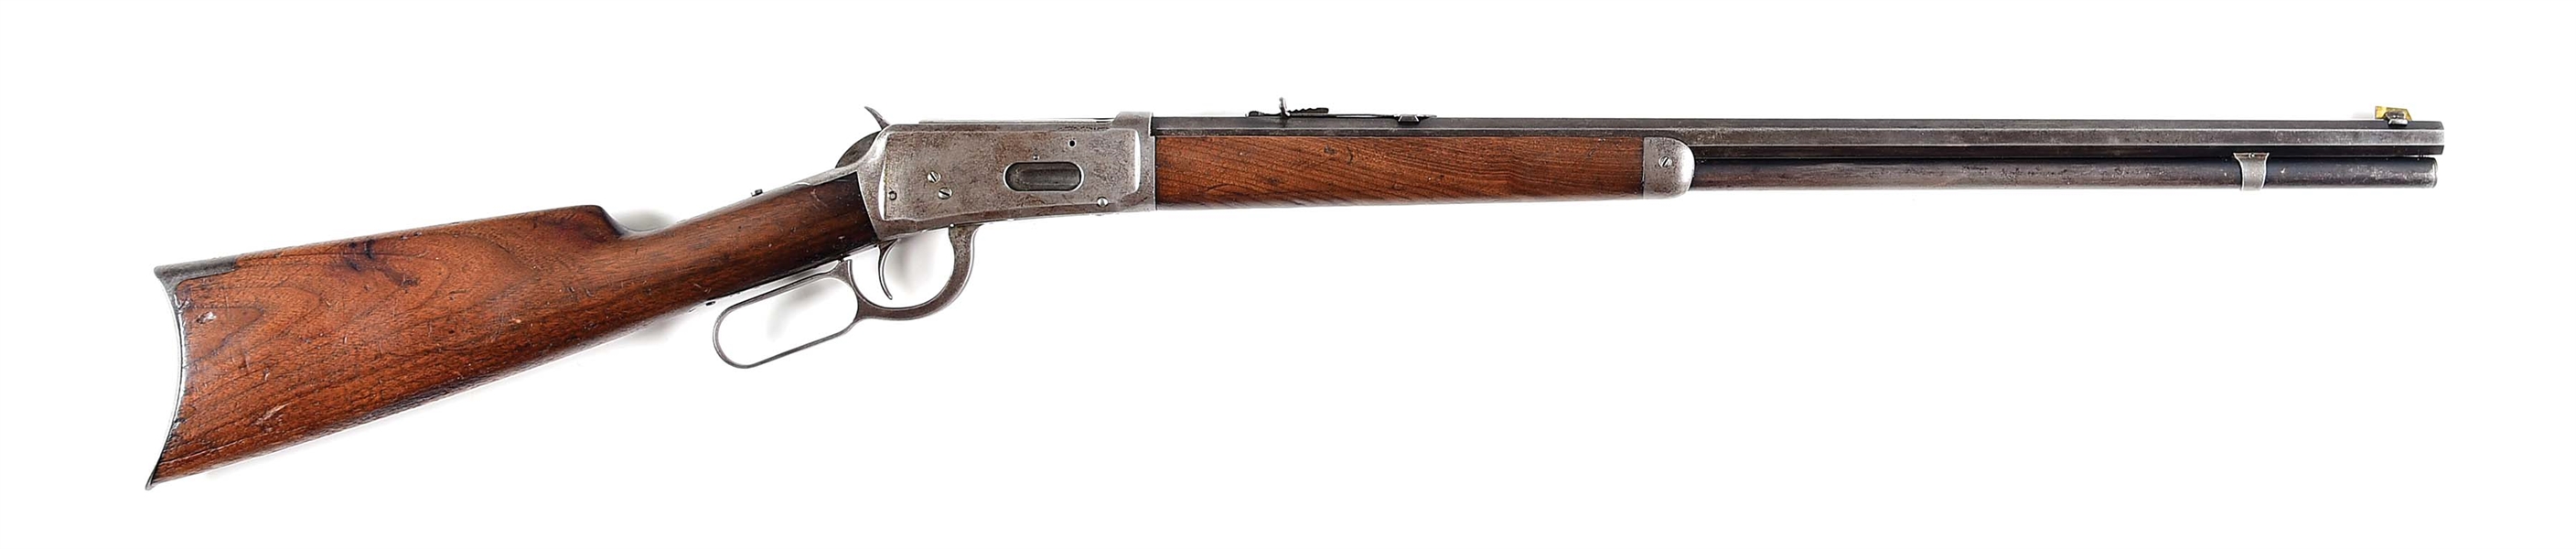 (C) WINCHESTER MODEL 1894 .30-30 W.C.F. LEVER ACTION RIFLE (1905).